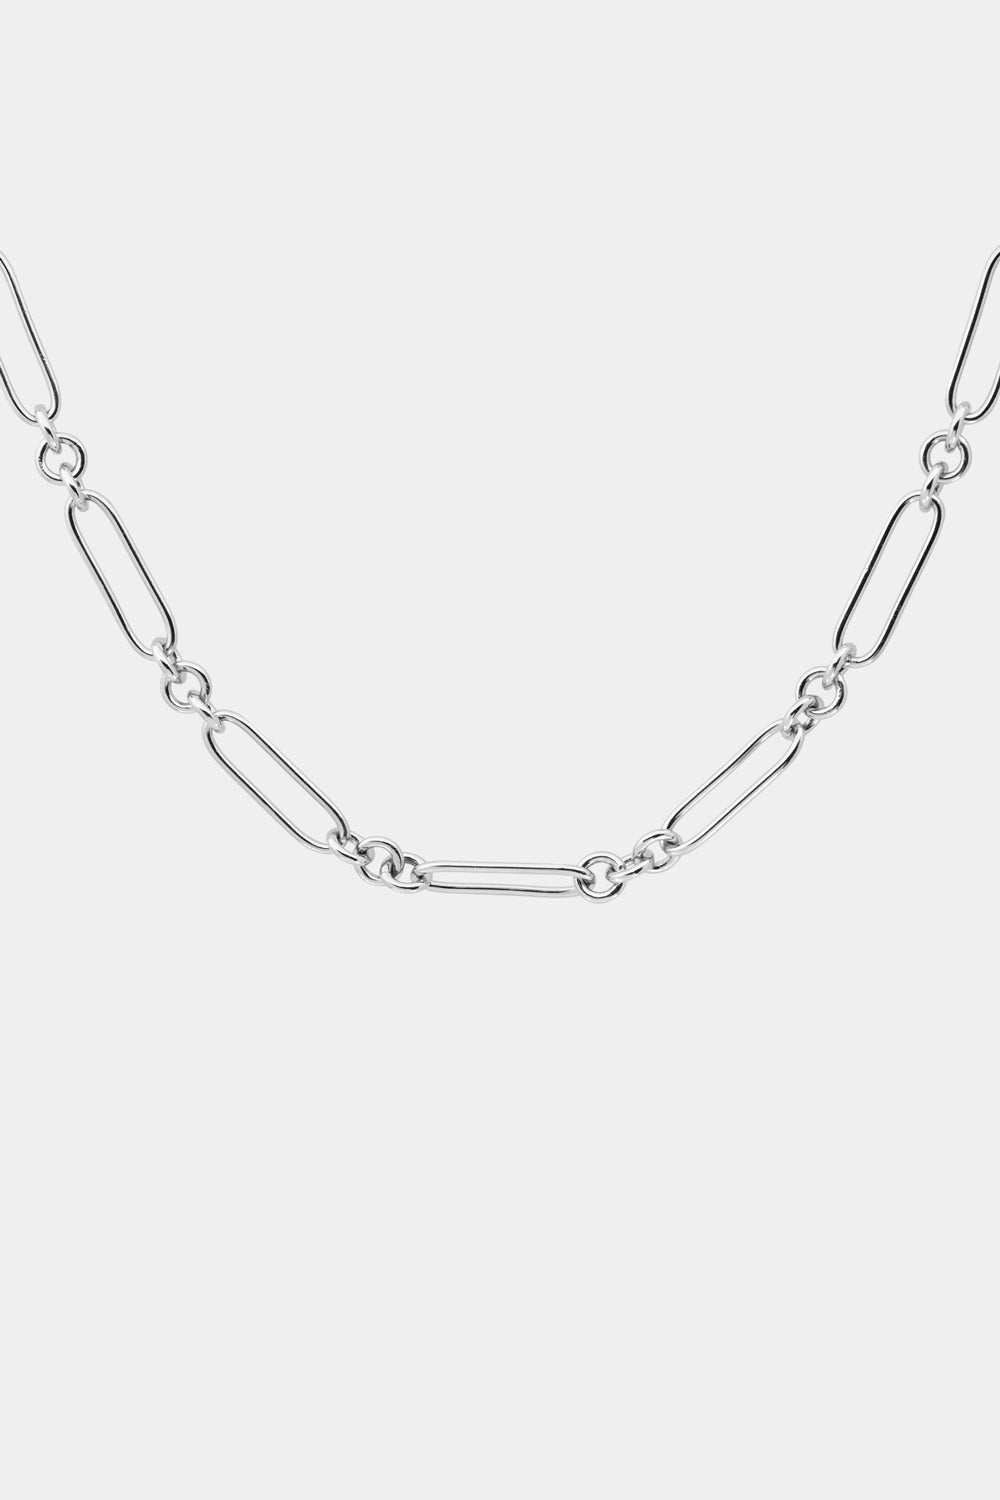 Lennox Necklace | Silver or 9K White Gold, More Options Available